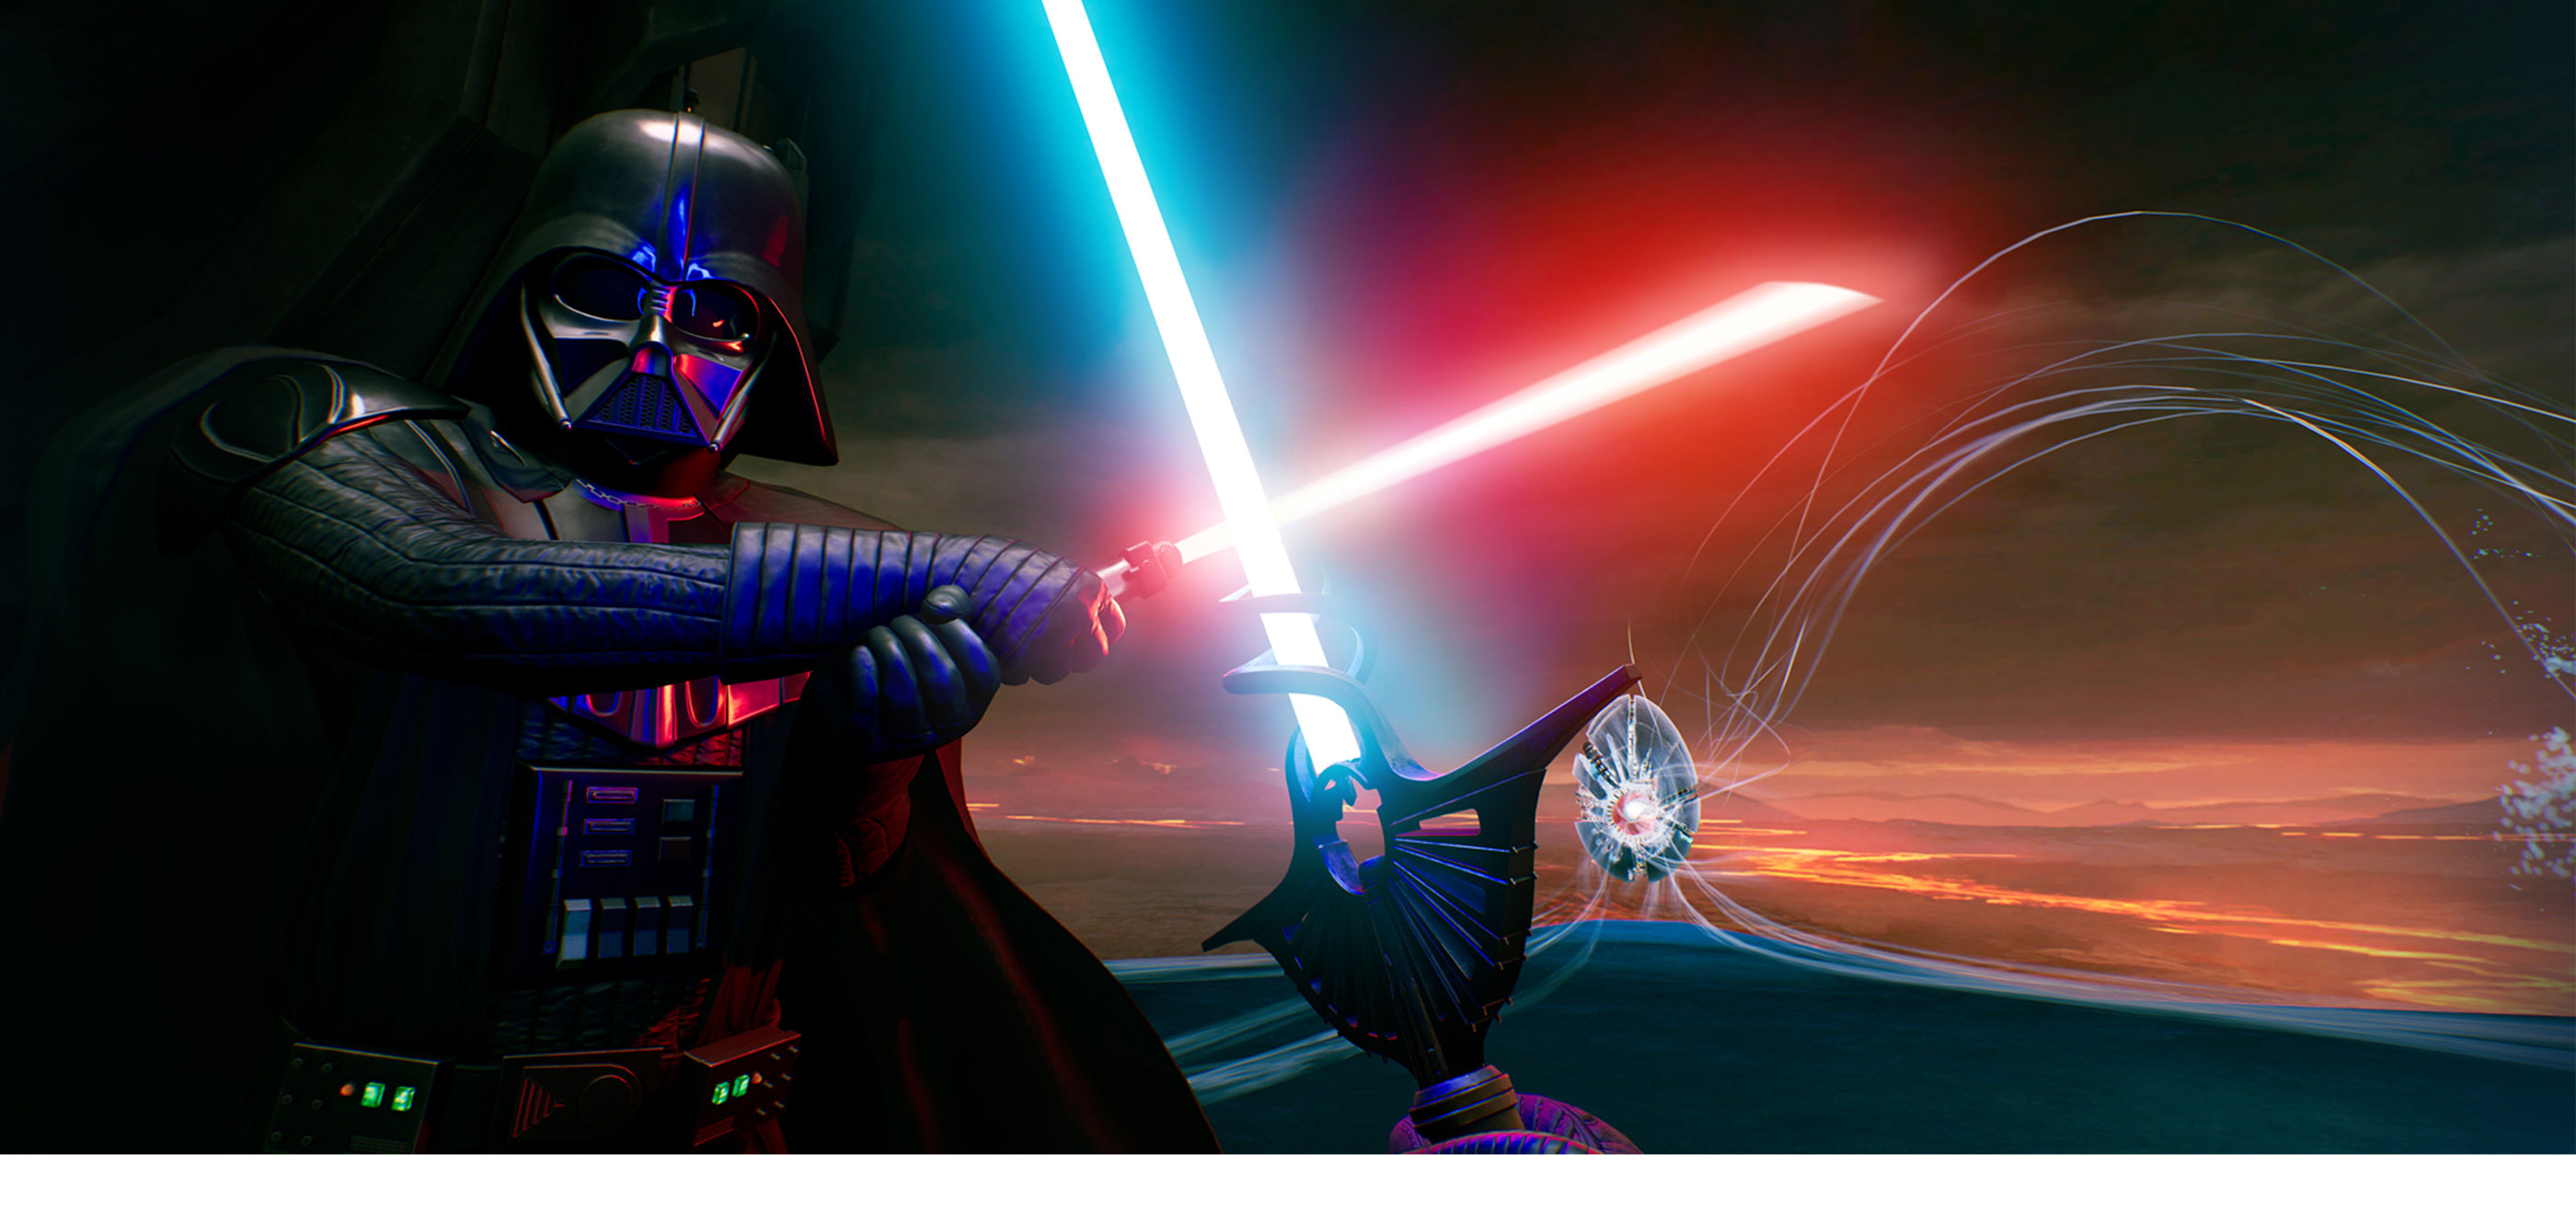 Darth Vader and the VR player clash lightsabers in a screenshot from Episode III of Star Wars: Vader Immortal.